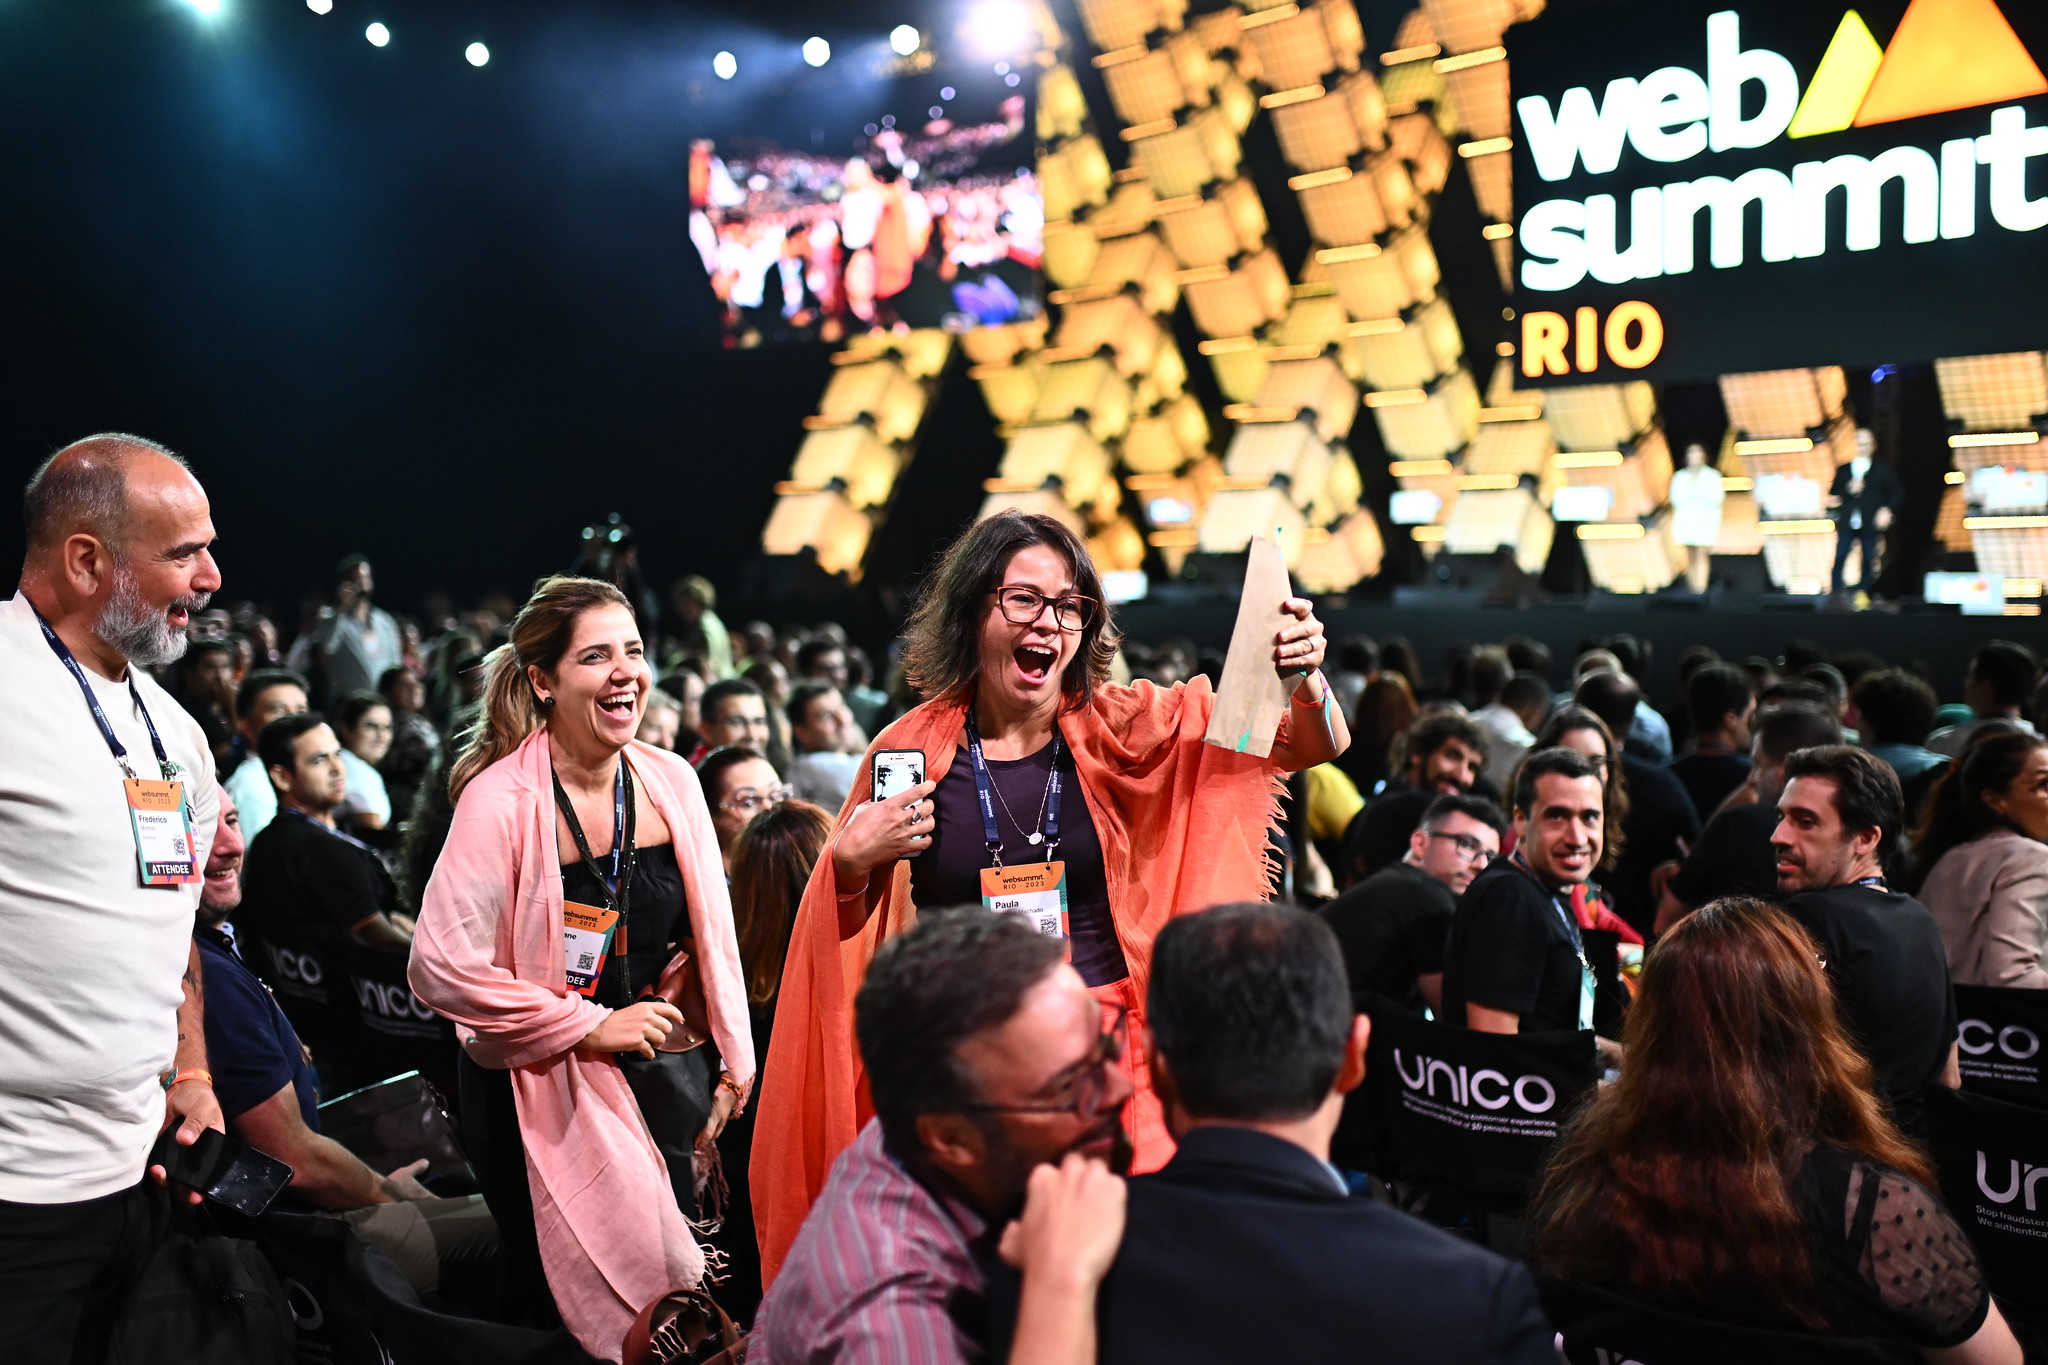 The Golden Ticket winner is announced on Centre Stage during the opening night of Web Summit Rio 2023 at Riocentro in Rio de Janeiro, Brazil